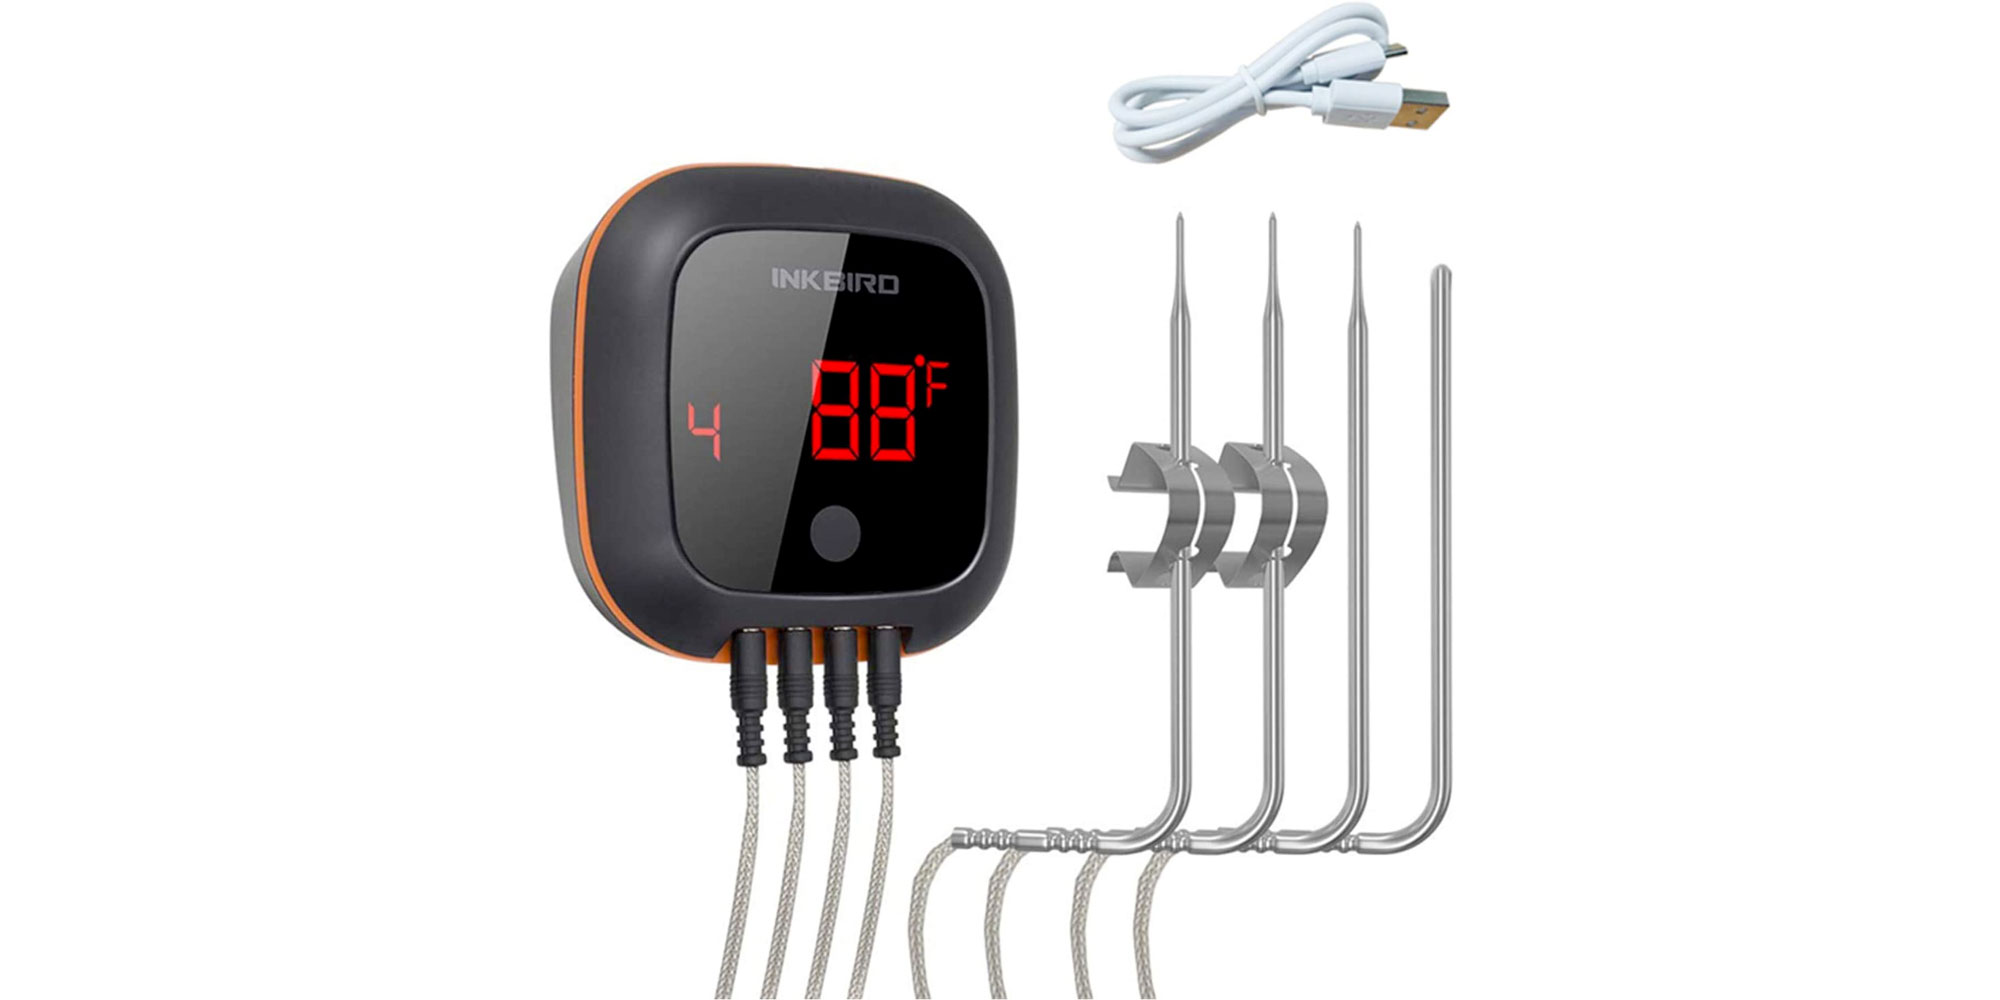 https://9to5toys.com/wp-content/uploads/sites/5/2020/07/inkbird-bluetooth-grill-thermometer.jpg